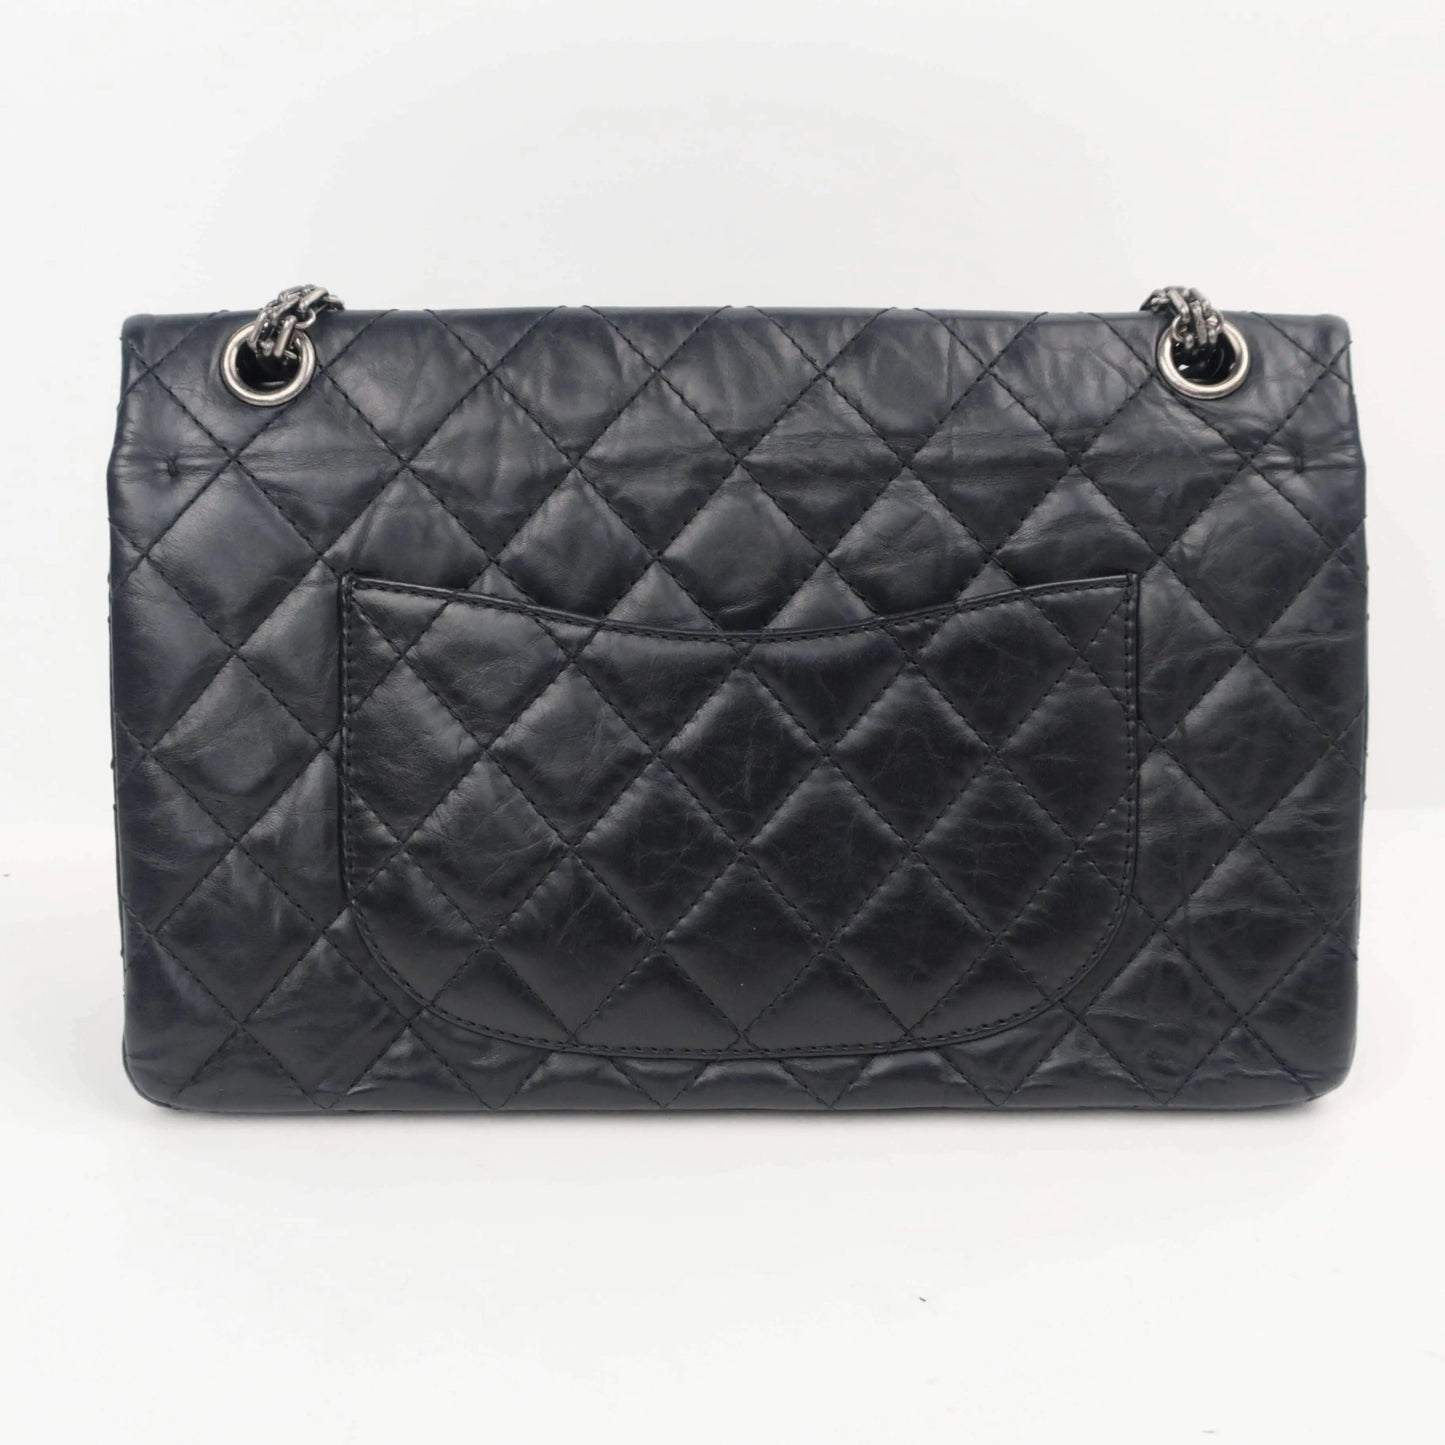 Louis Vuitton Chanel Reissue 2.55 Quilted Classic Lambskin Black Leather Bag LVBagaholic